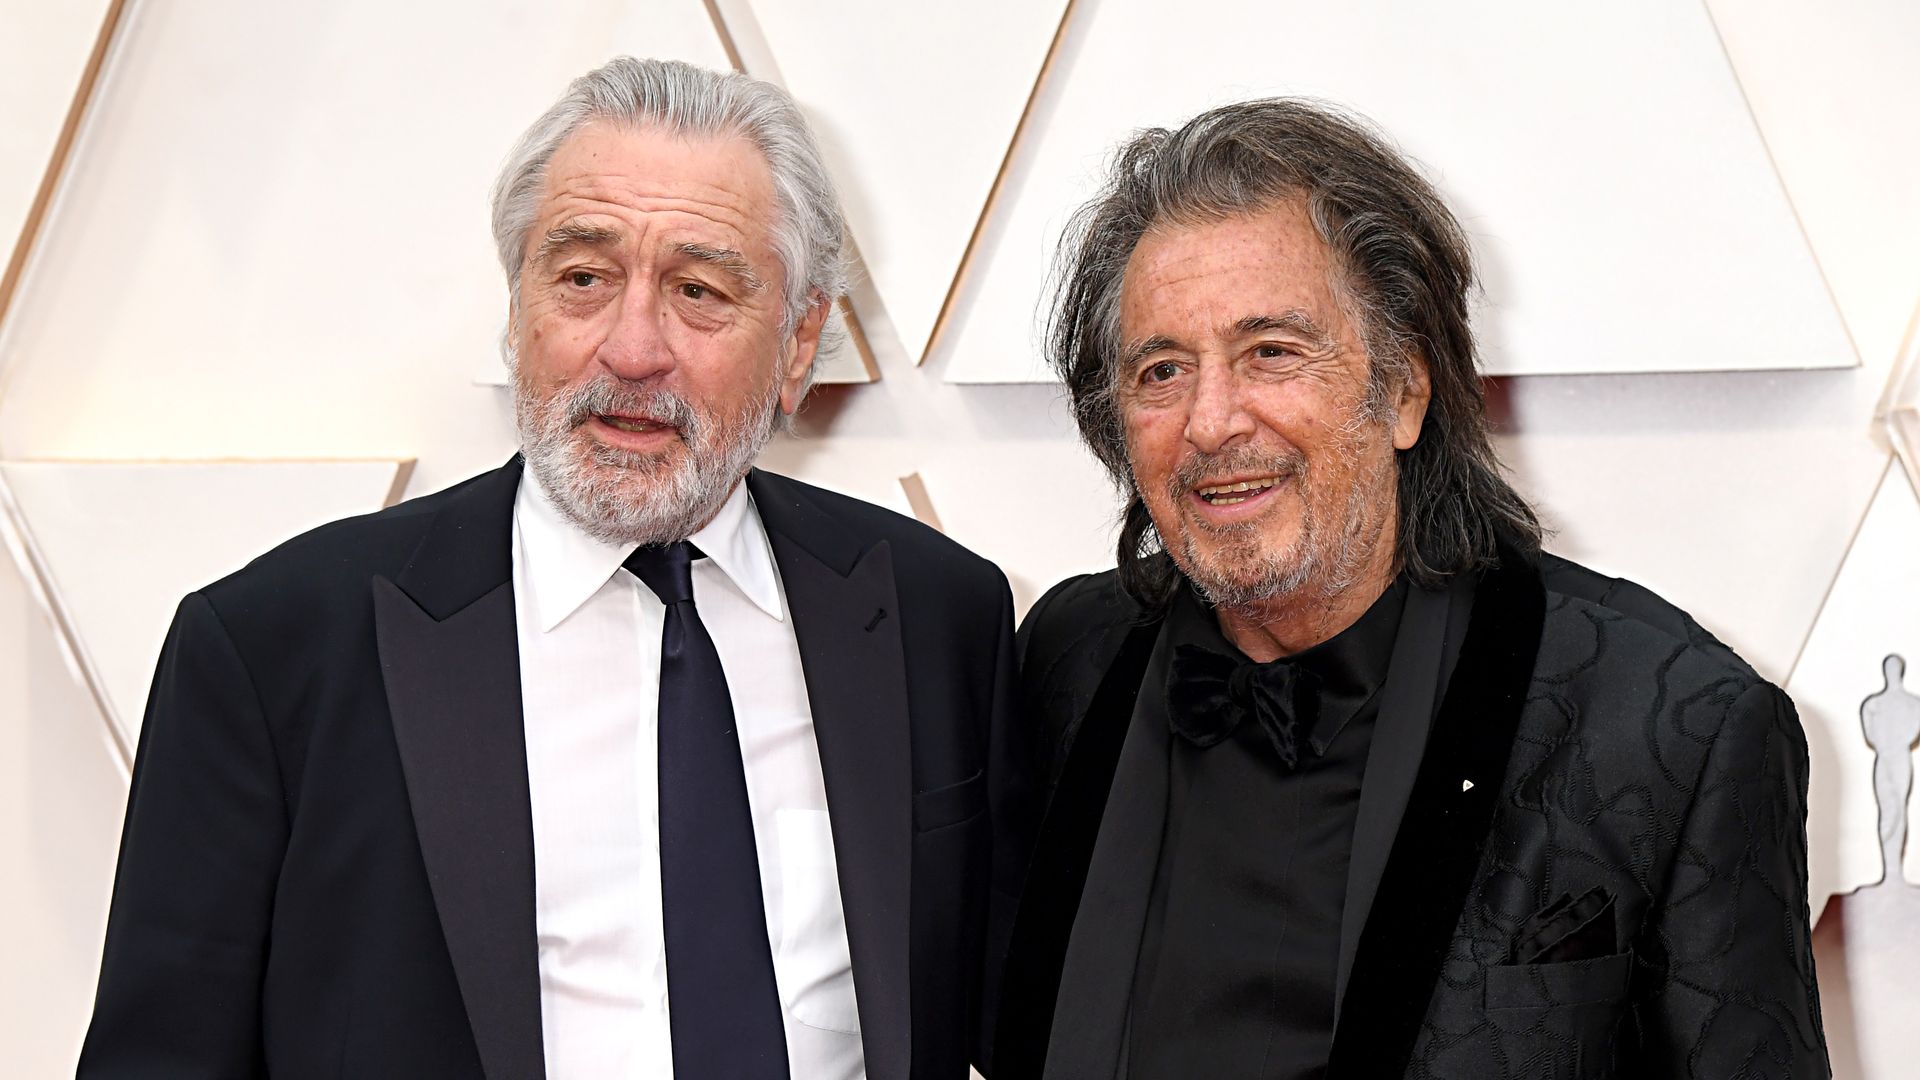 Robert De Niro and Al Pacino attend the 92nd Annual Academy Awards 